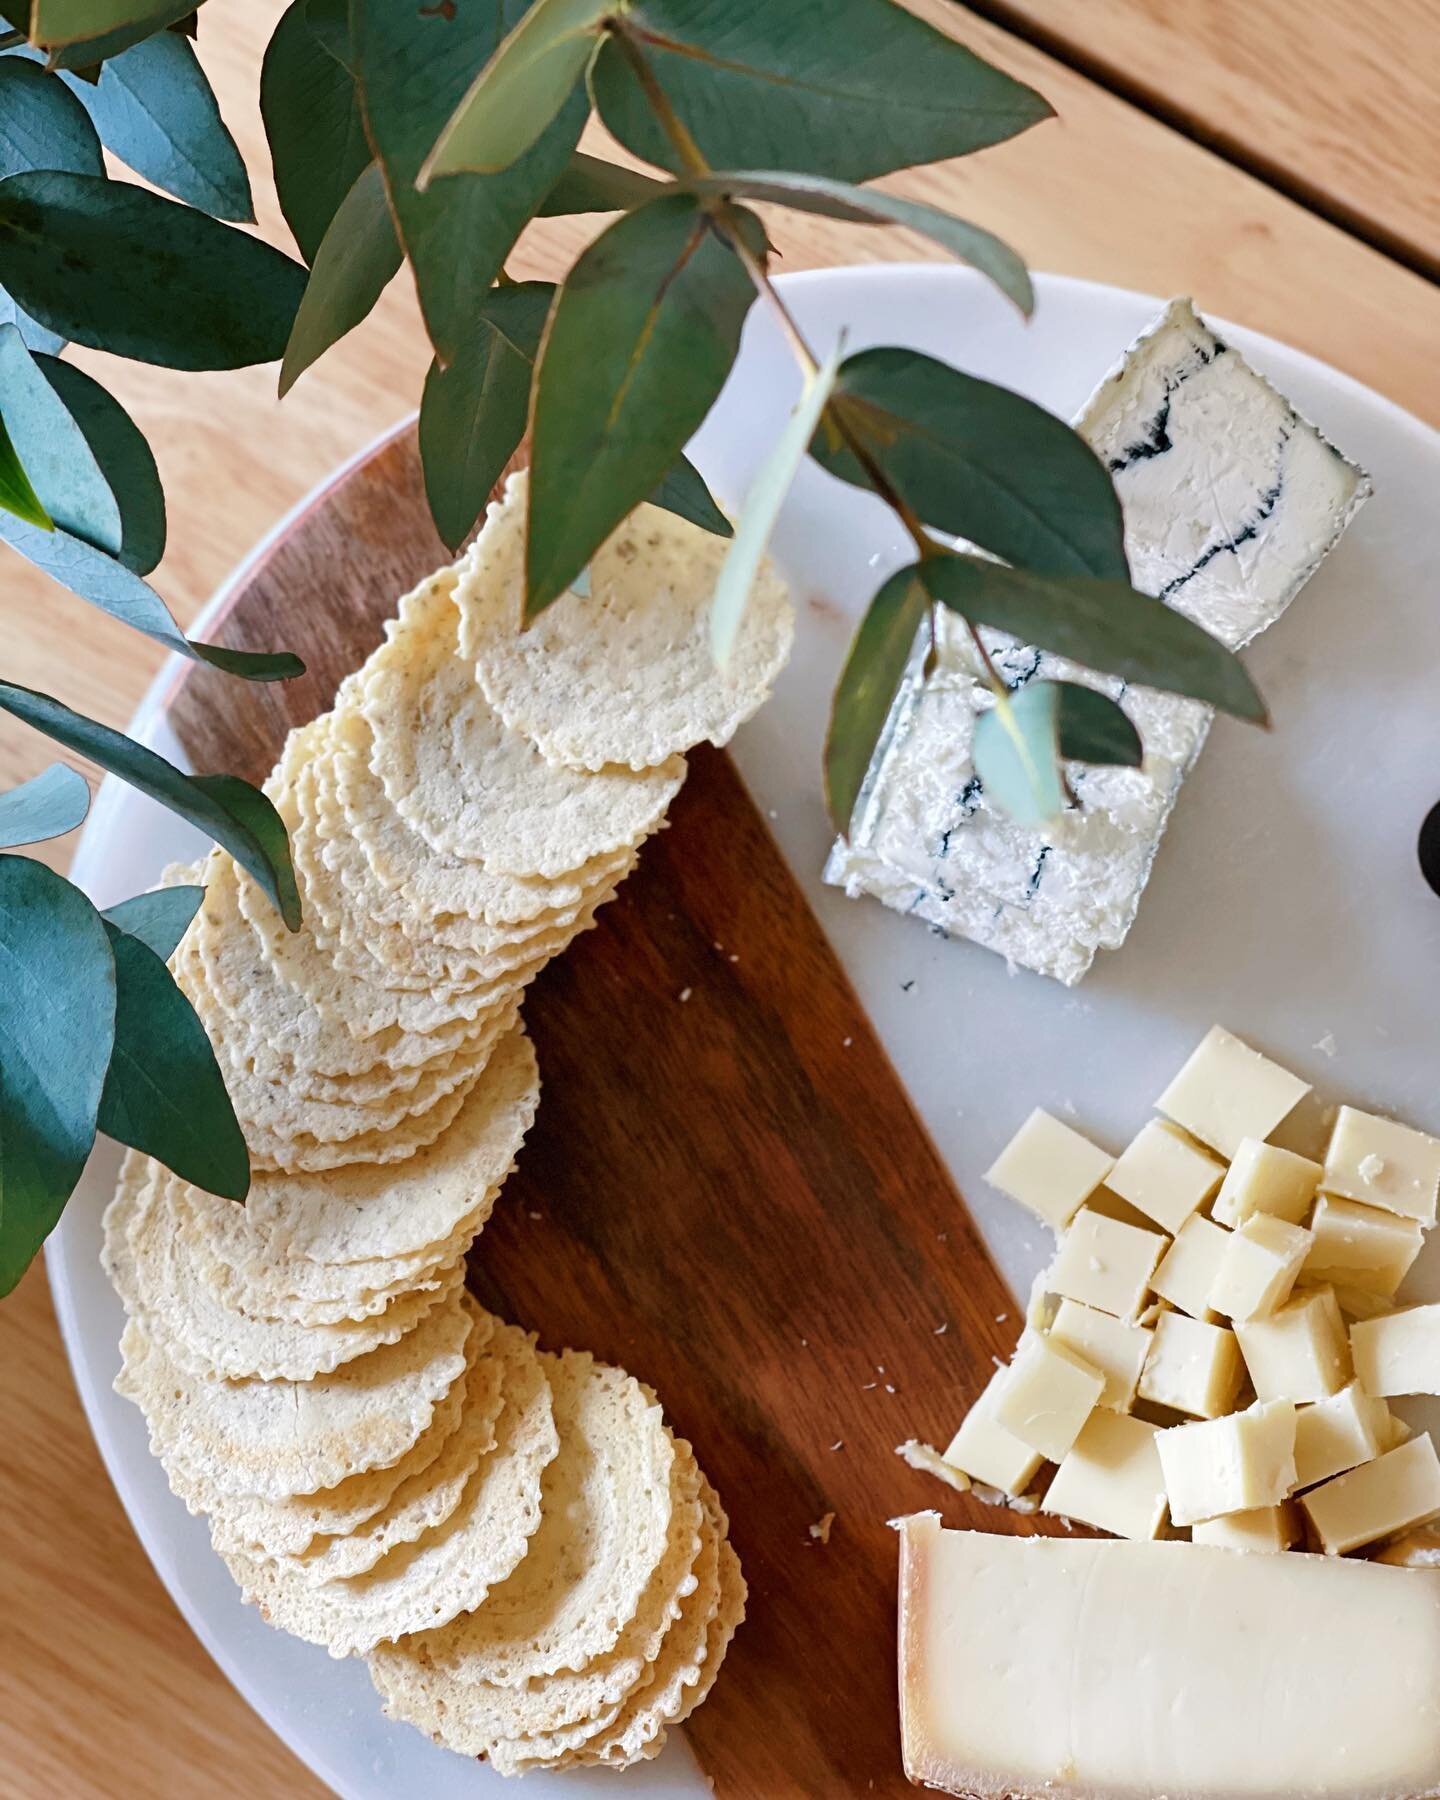 🍃 Last minute hosting on a Friday night or a Friday night in? 🧀 

Serving you an easy, elegant, delicious and substantial (all the adjectives) cheese and cracker board with wine pairings! If local, swing by @fairfieldgreenwichcheeseco and pick thes